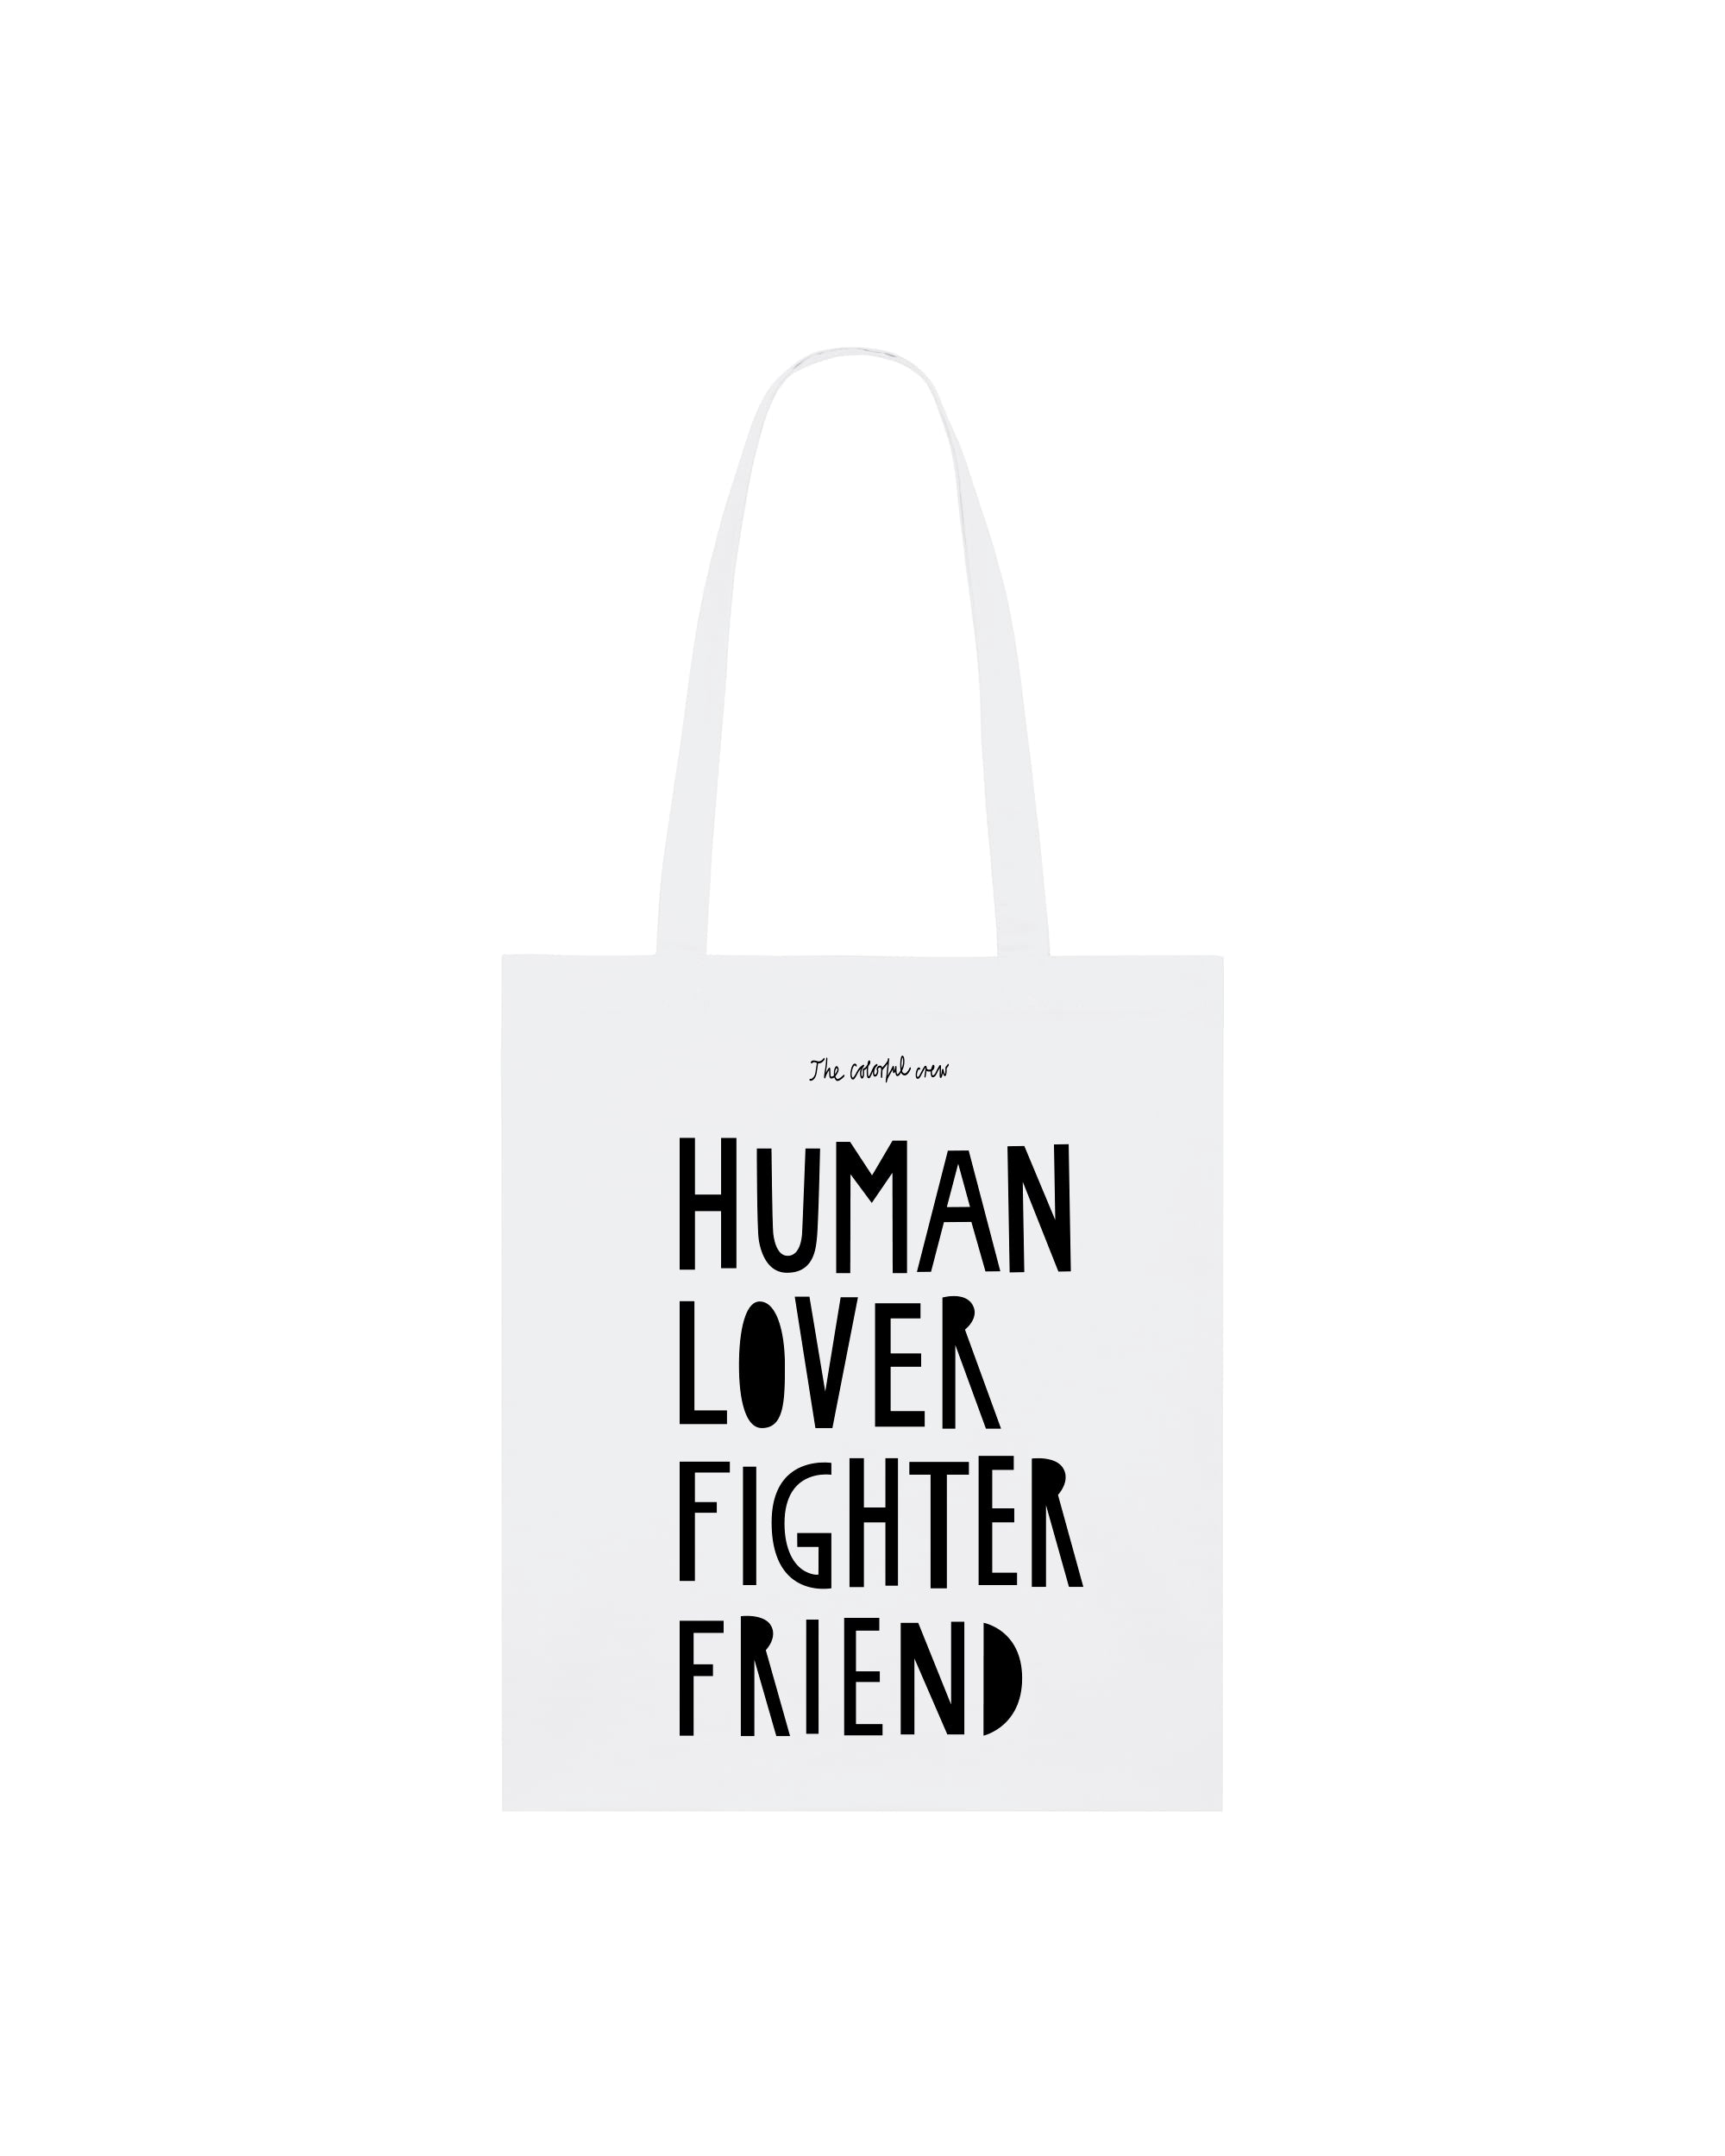 SALE // HUMAN LOVER FIGHTER FRIEND Tote Bag